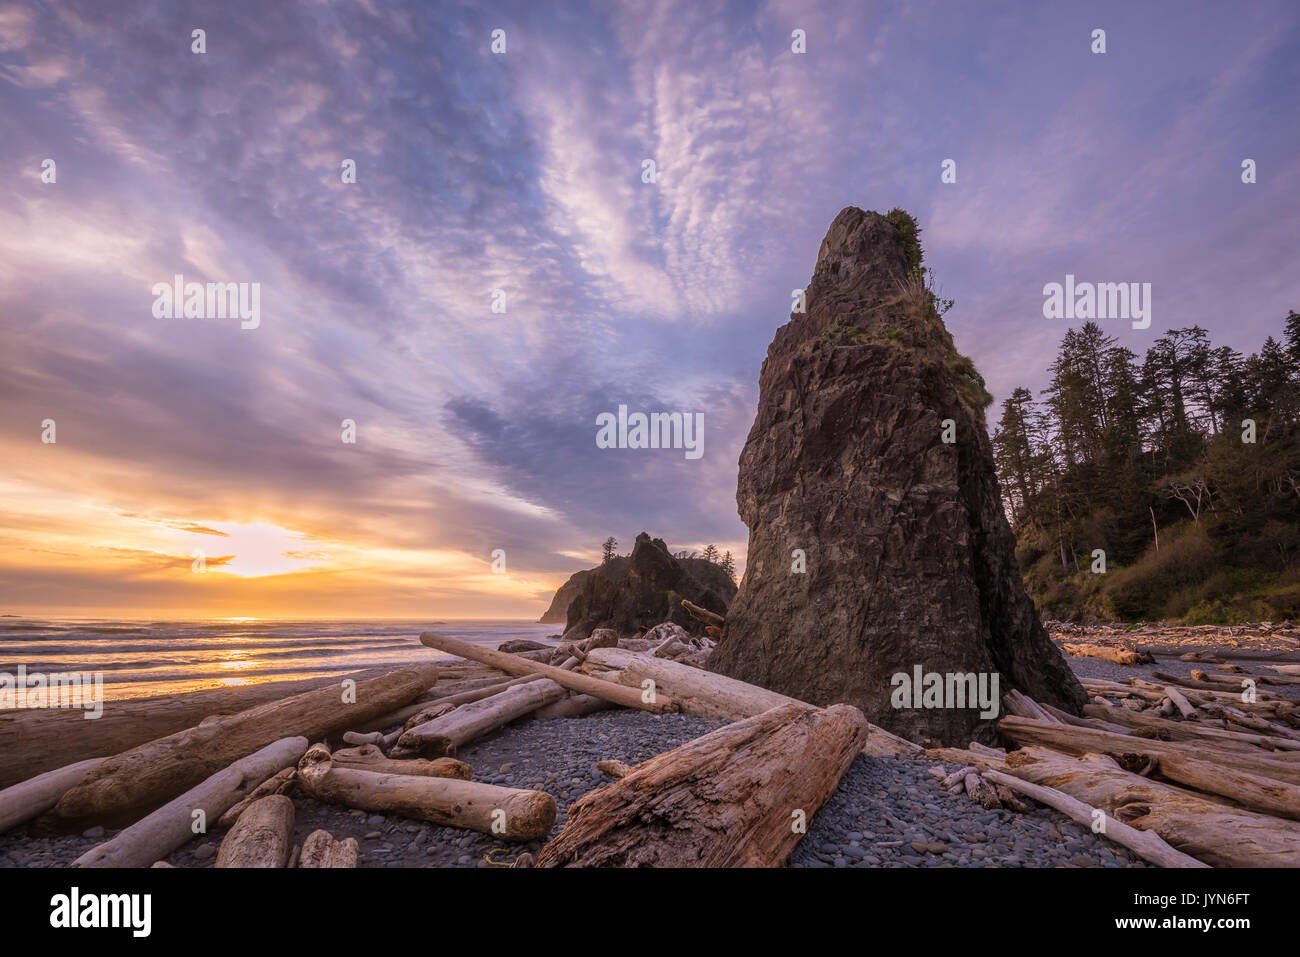 Driftwood, sea stack and sunset at Ruby Beach, Olympic National Park, Washington. Stock Photo